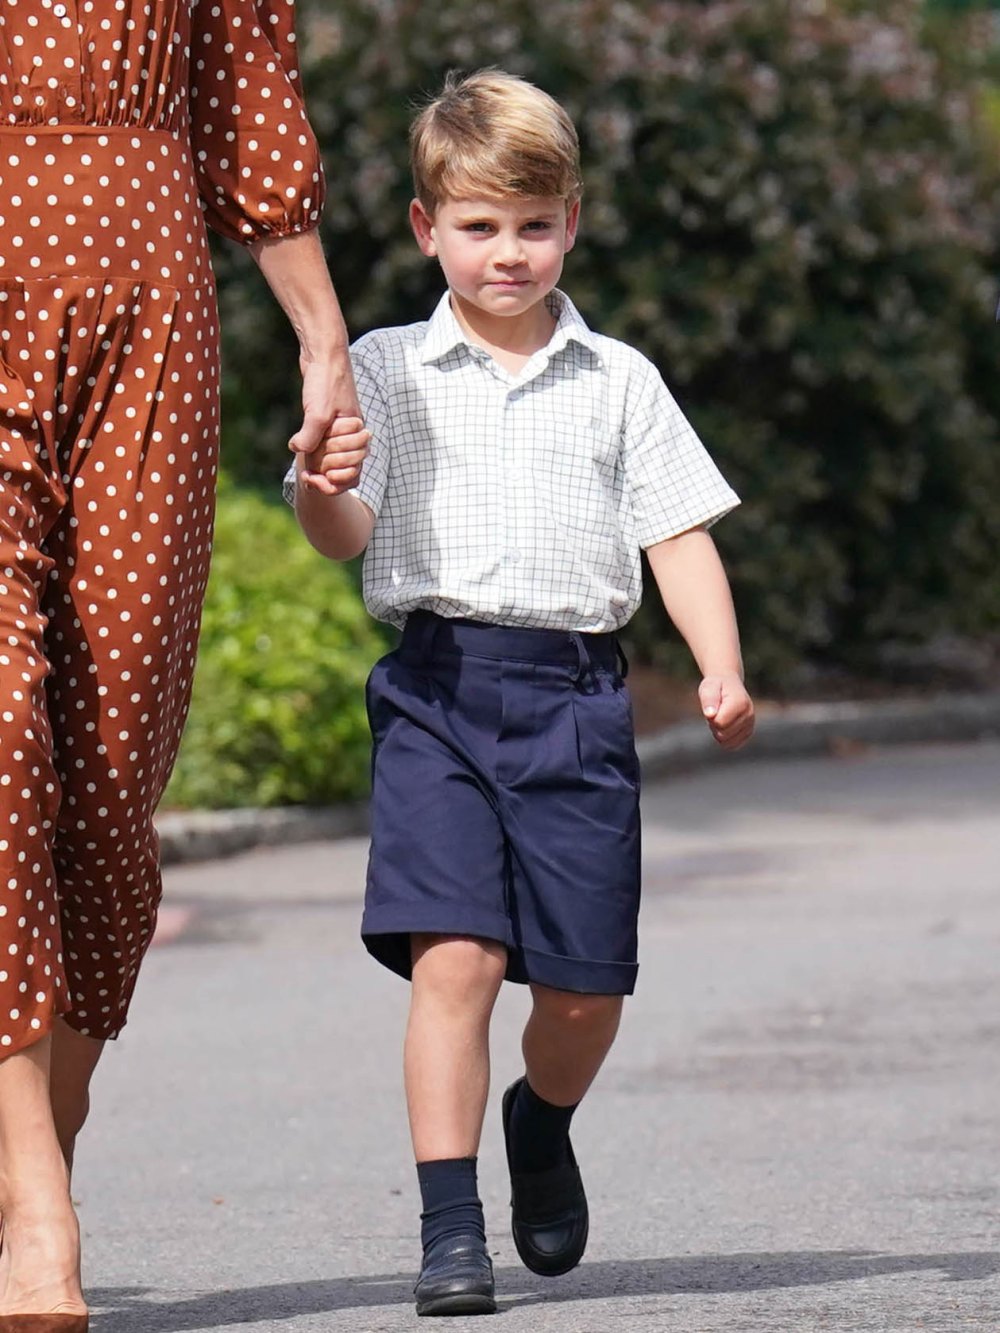 Prince Louis Is All Smiles in Plaid Button Down Shirt and Shorts for His 6th Birthday Portrait